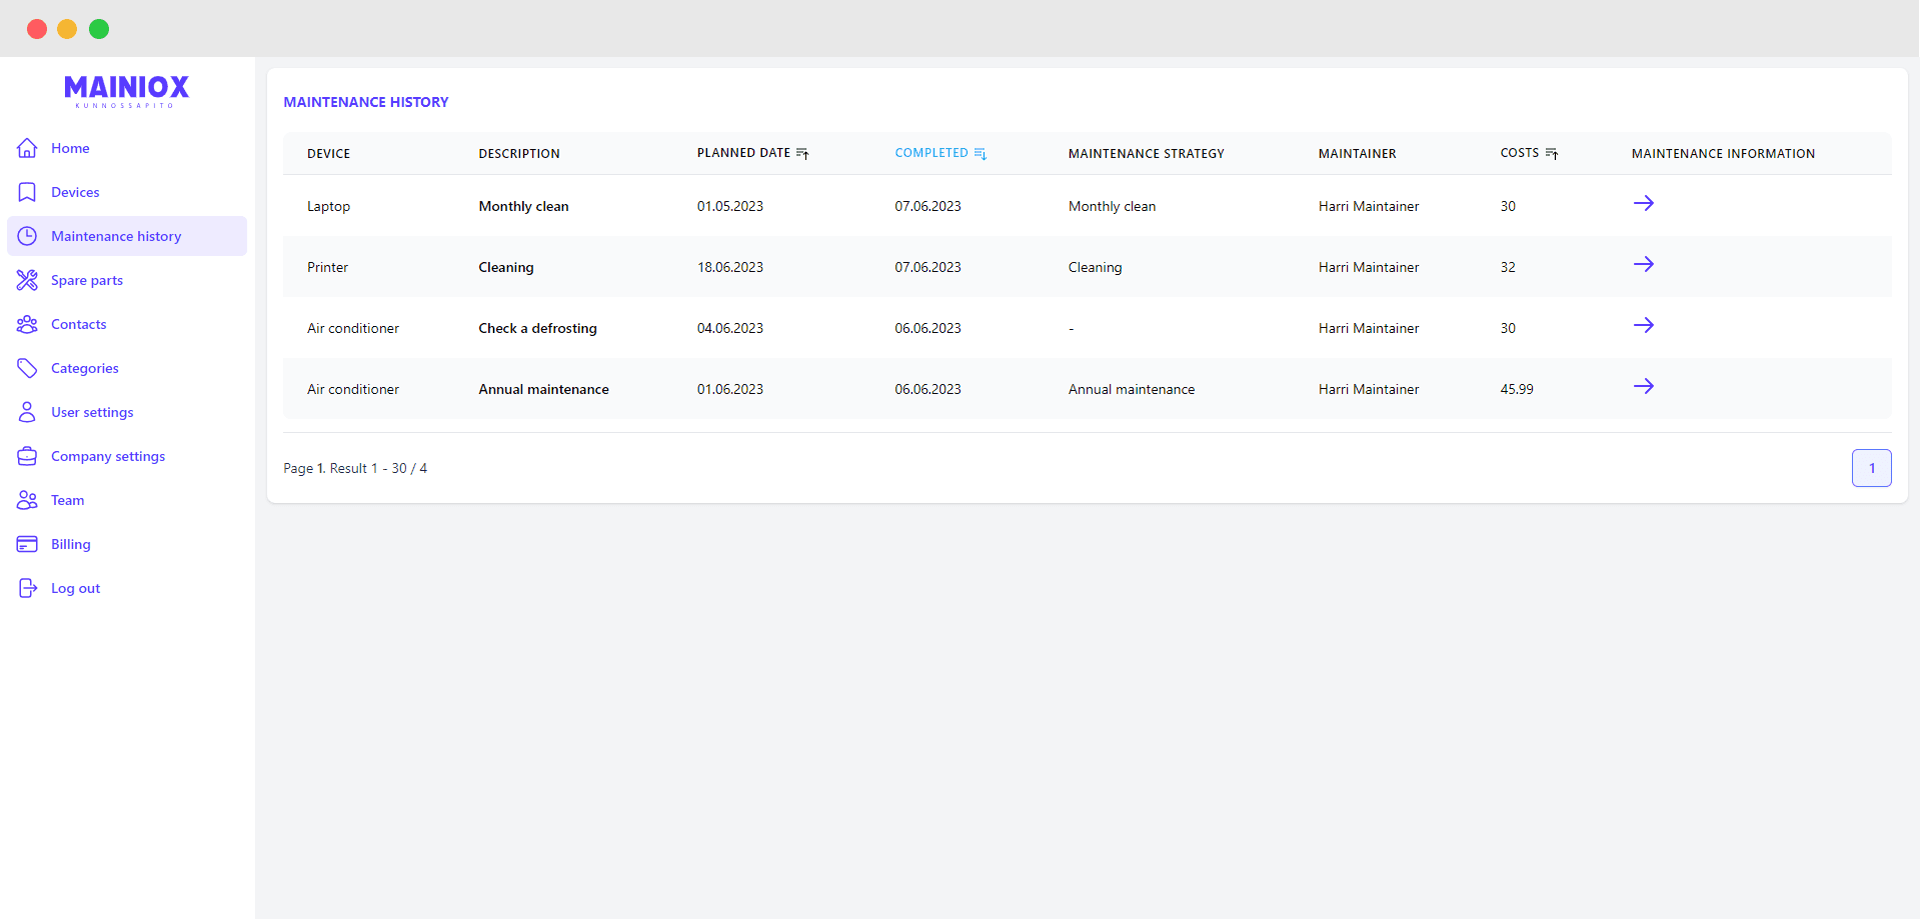 The screenshot showcases the comprehensive maintenance history of machines and equipment stored in the Mainiox software, offering a quick and clear overview of performed maintenance actions. It ensures the reliable operation of the devices and simplifies the planning and tracking of maintenance tasks.